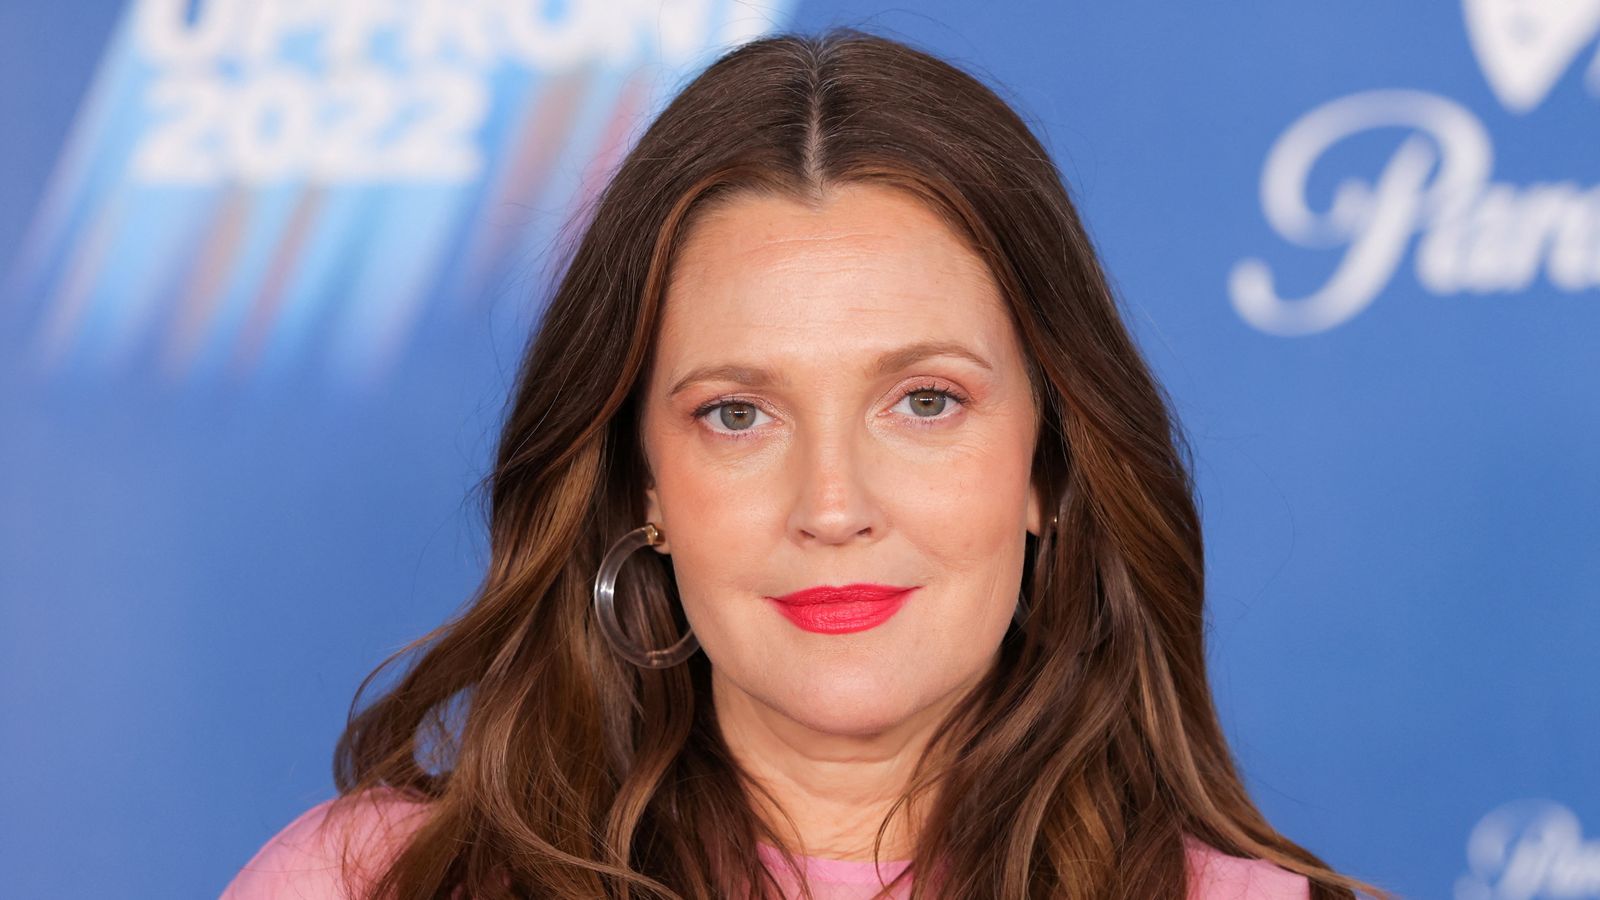 Drew Barrymore dropped as awards host, and faces backlash for filming talk show despite strikes 